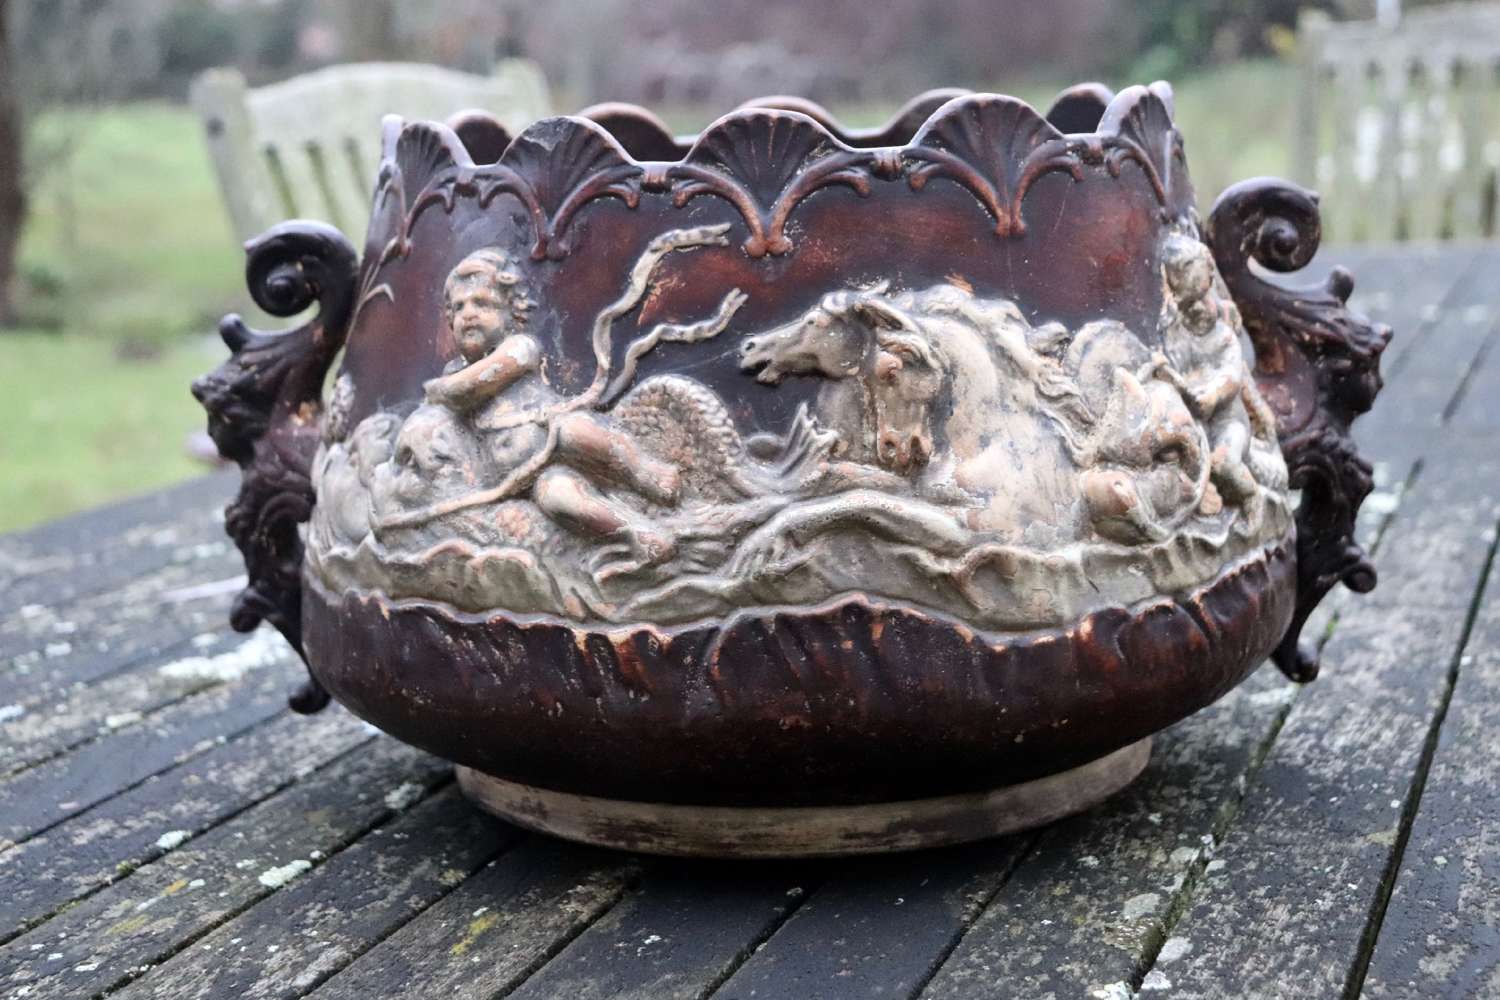 Early 19th century French earthenware pot